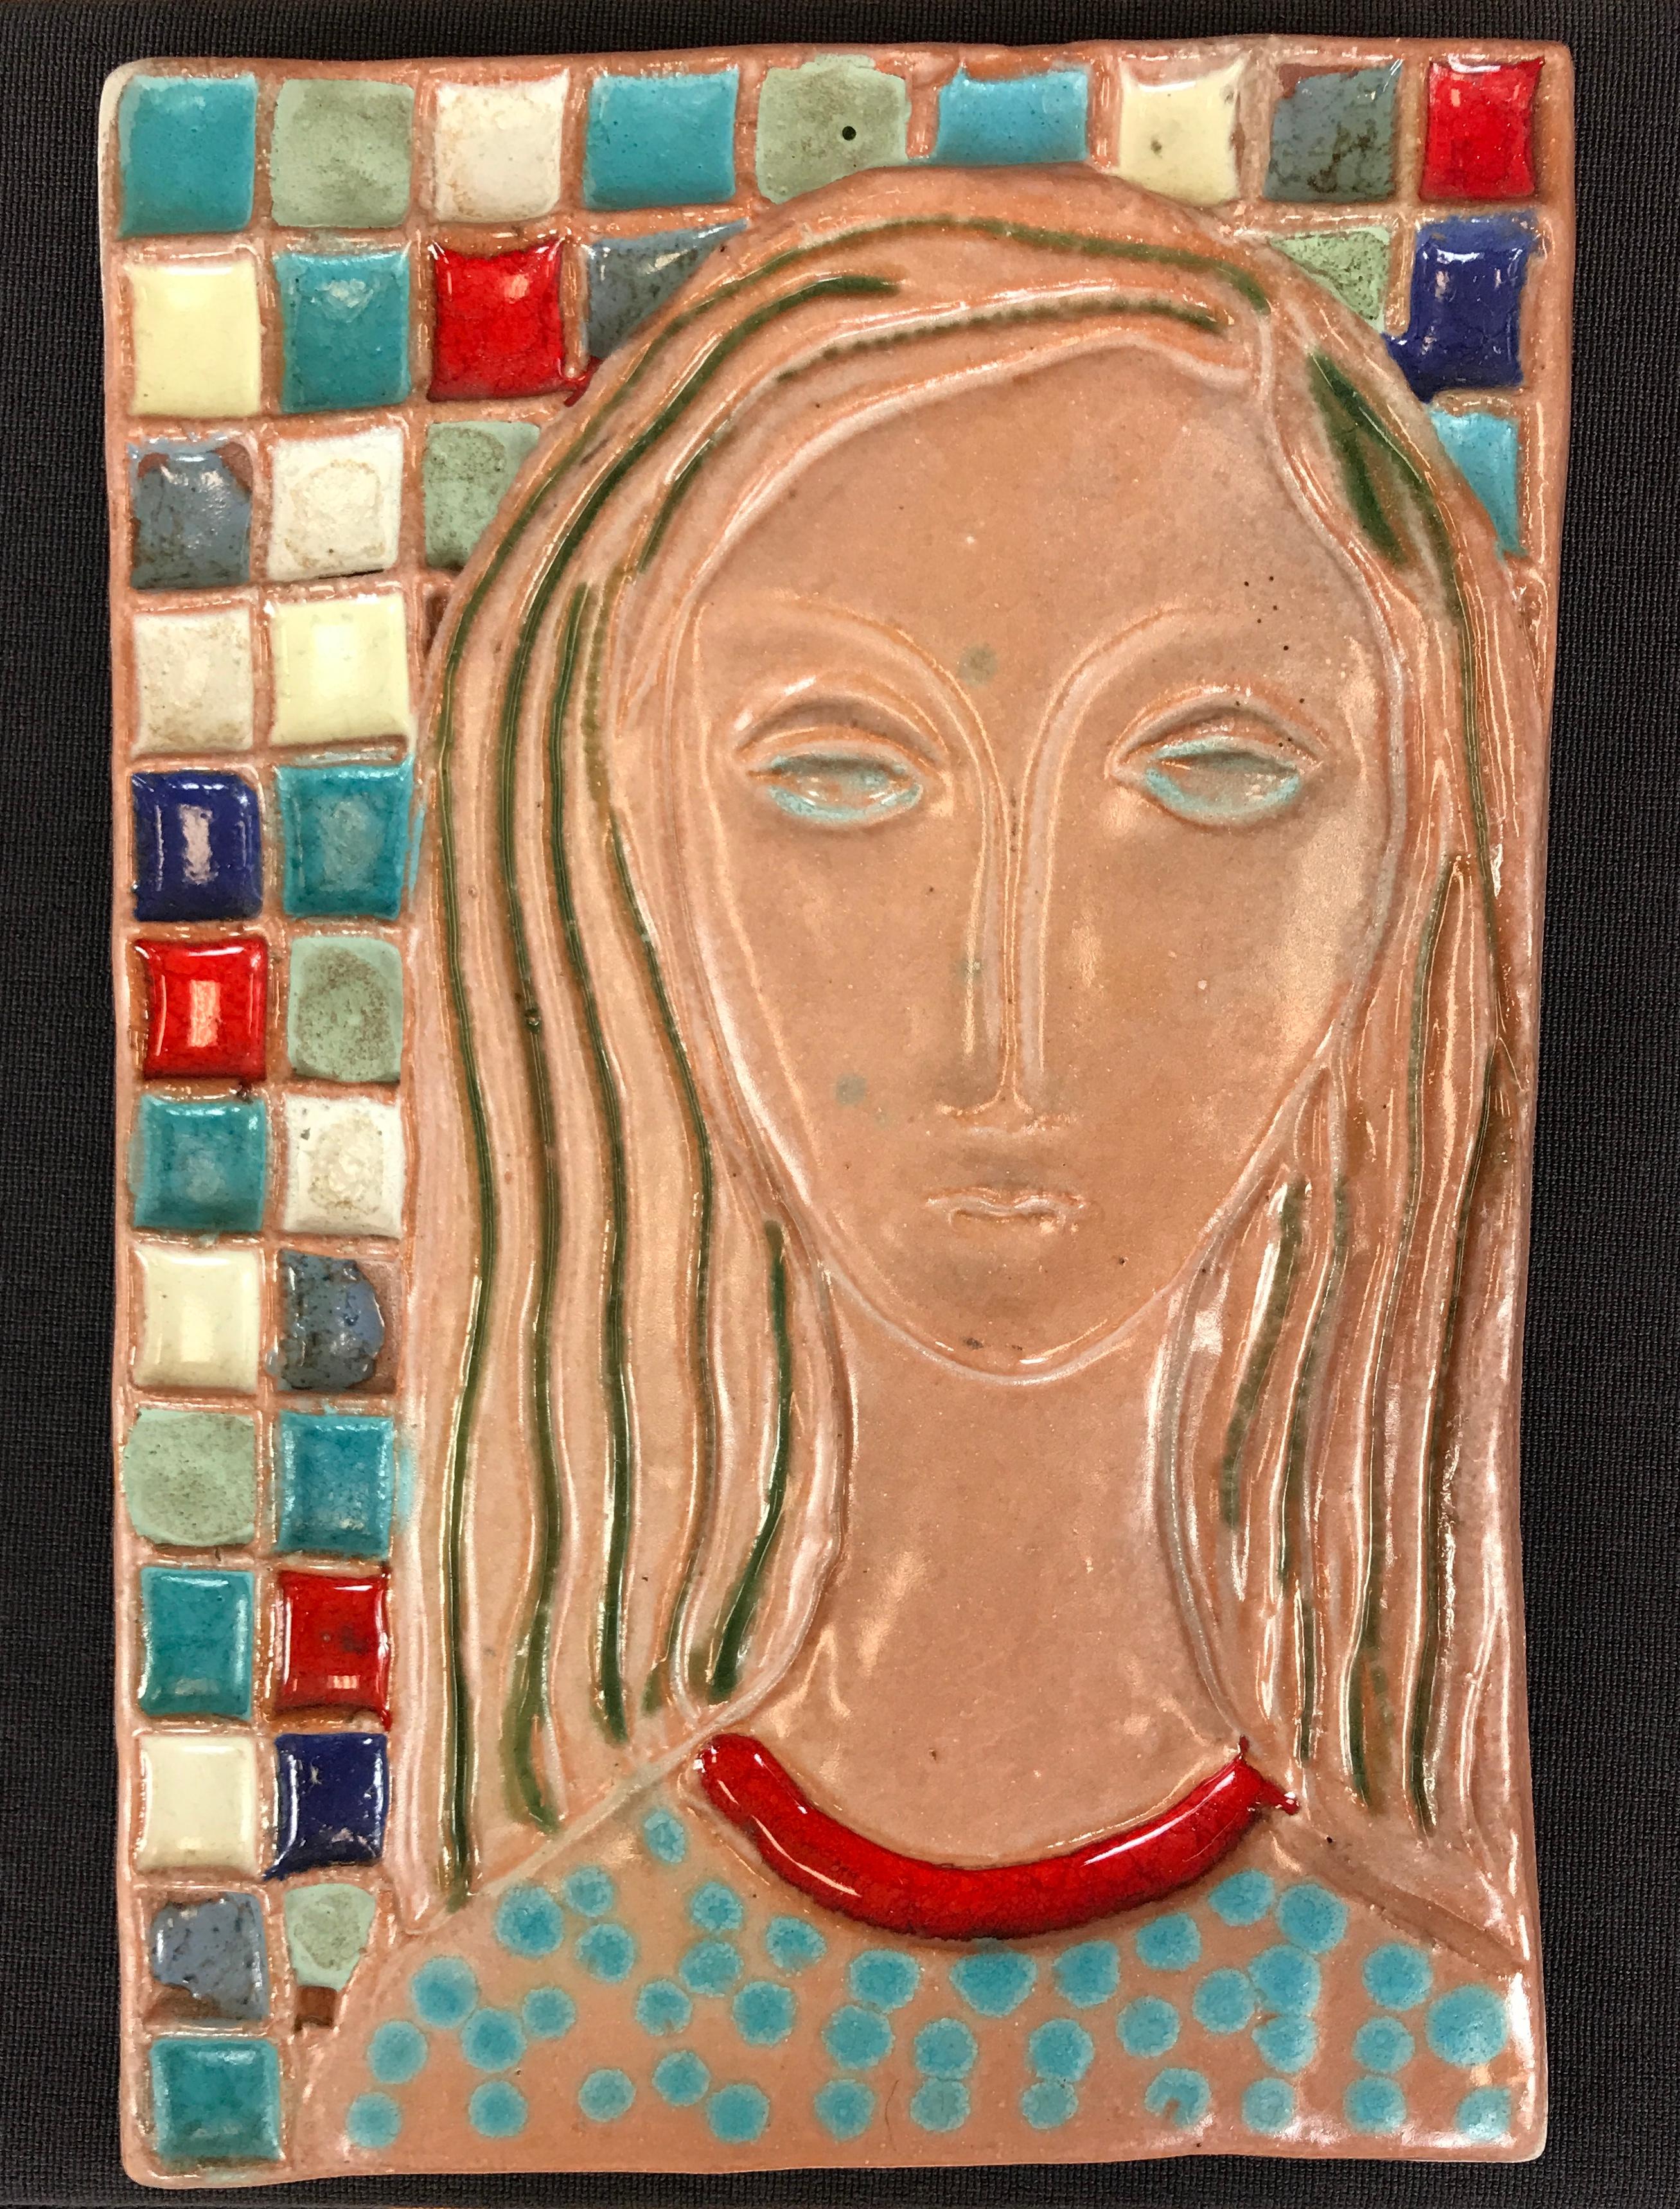 A very large Harris strong ceramic tile art, subject is of a woman with long flowing hair, crew neck dress or shirt, with many squares behind her of many different colors.
The tile is signed back top right.